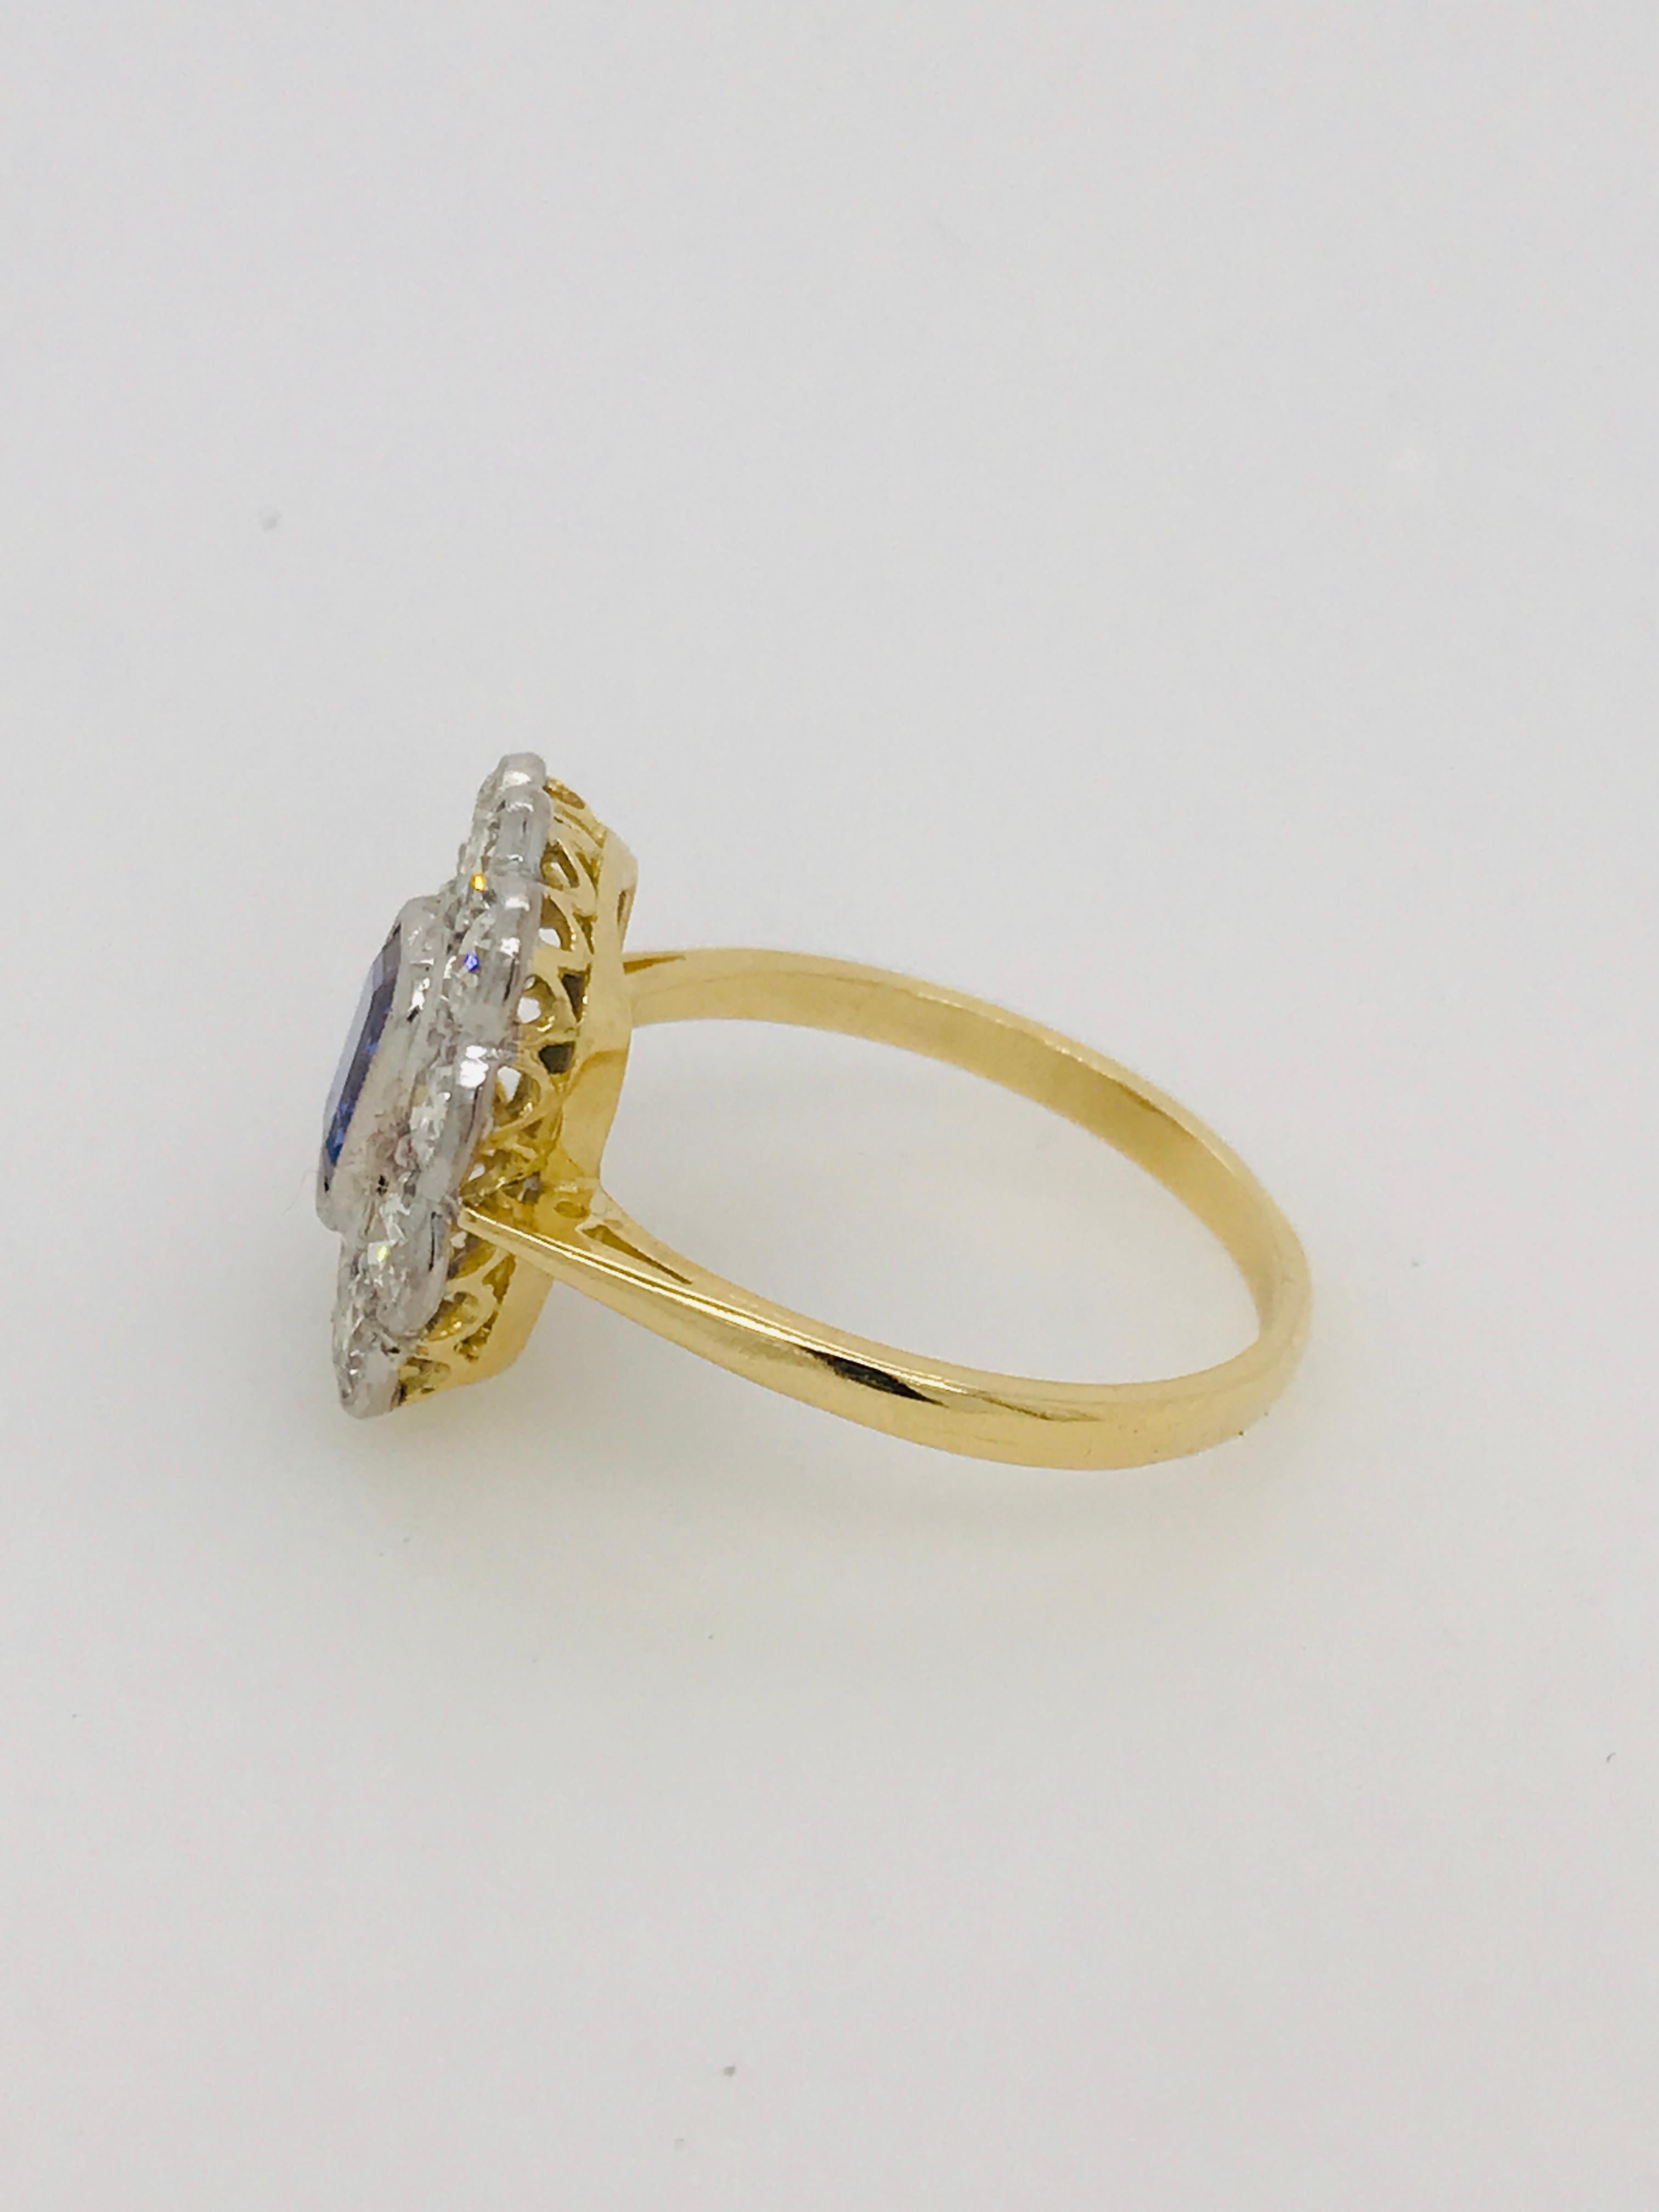 Beautiful platinum and 18ct yellow gold setting with hand pierced underbezel and set with the following - 
A Ceylon Sapphire in an emerald cut 1.18ct
Old cut diamonds in the surrounding scalloped cluster setting - 10 totalling 1.00ct HSI2
Ring size